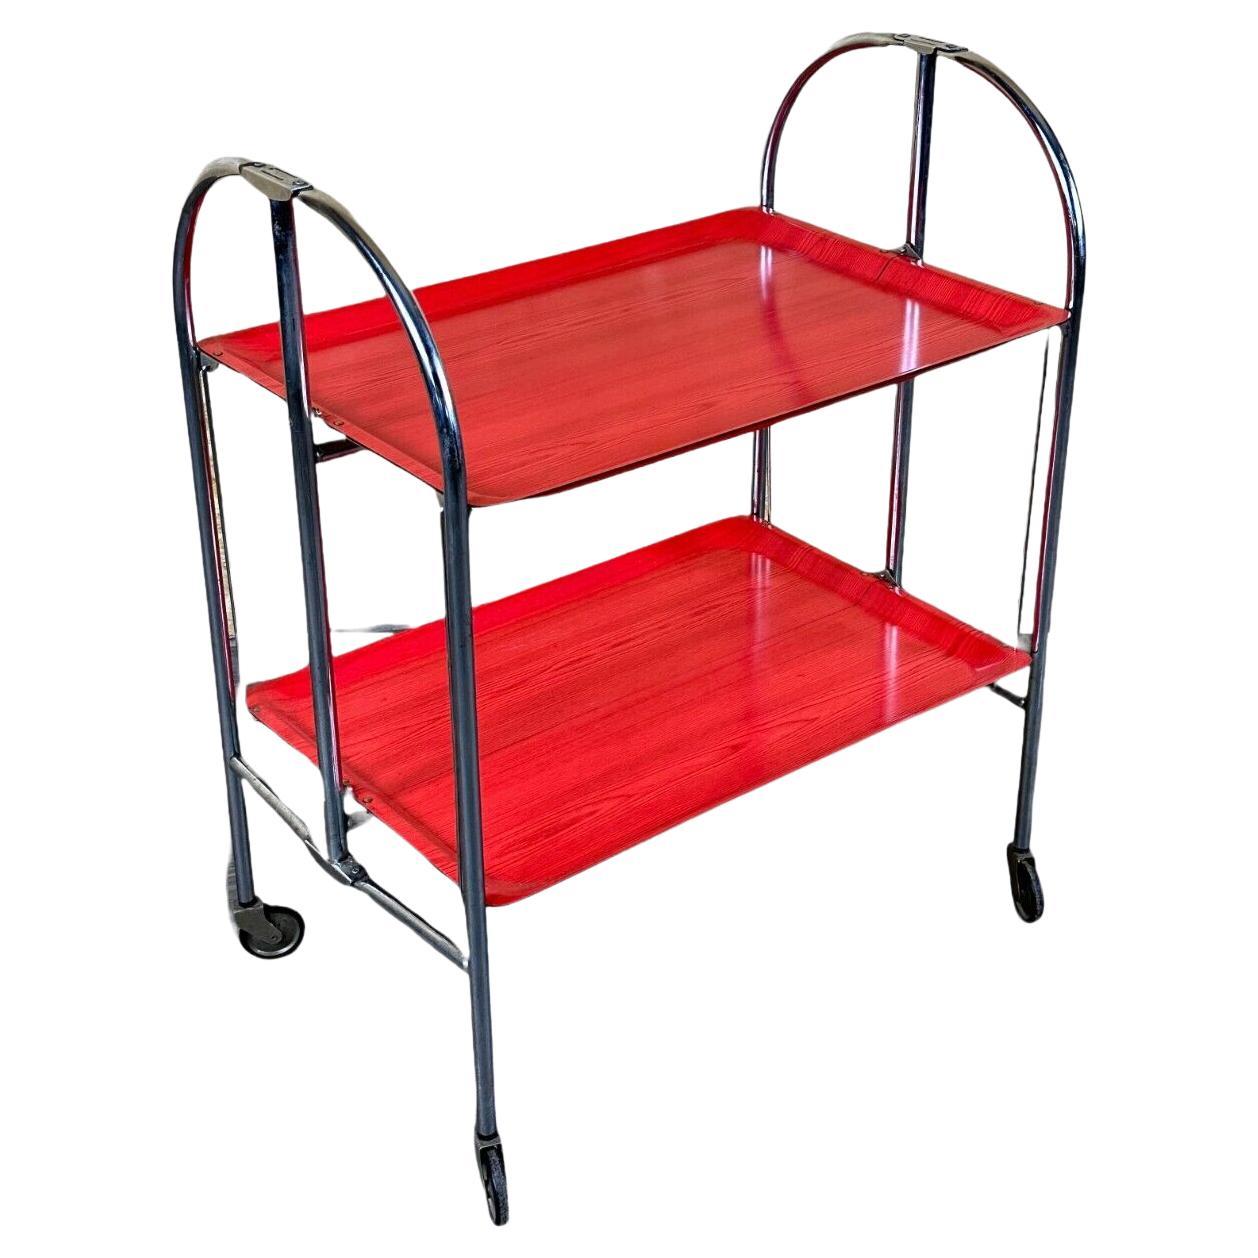 60s 70s serving trolley dinette side table space age red design